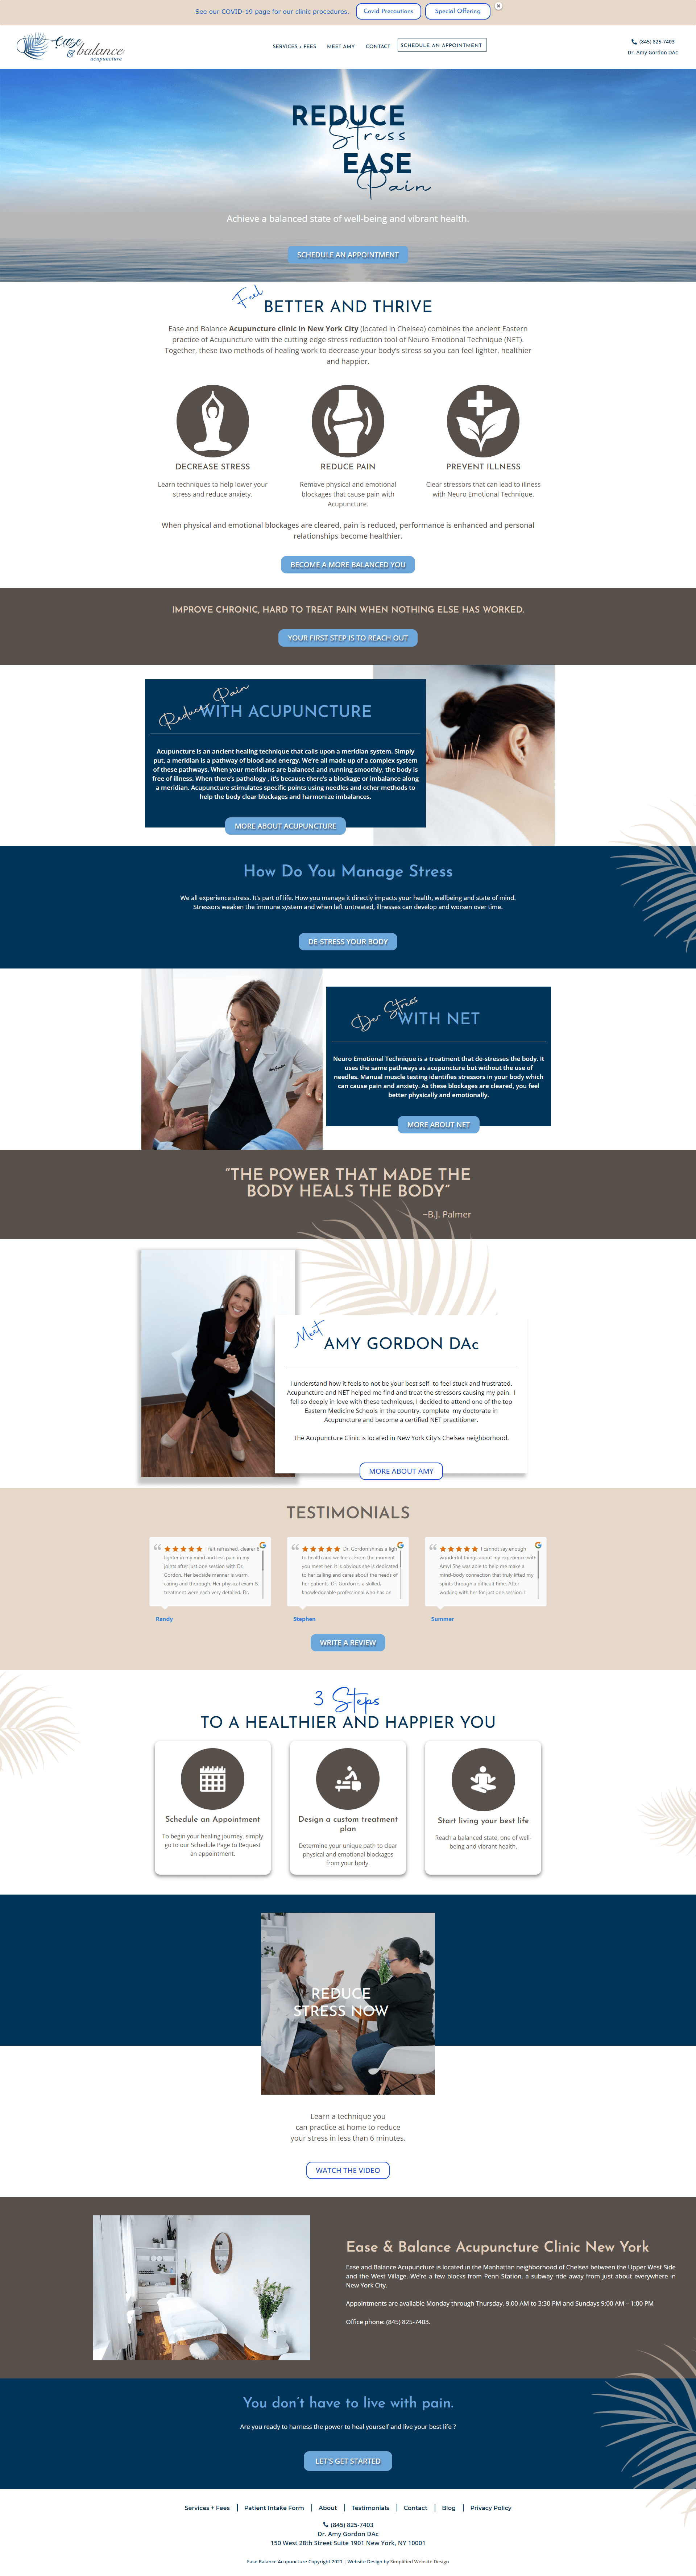 Example of Website Design for Acupuncture Clinic